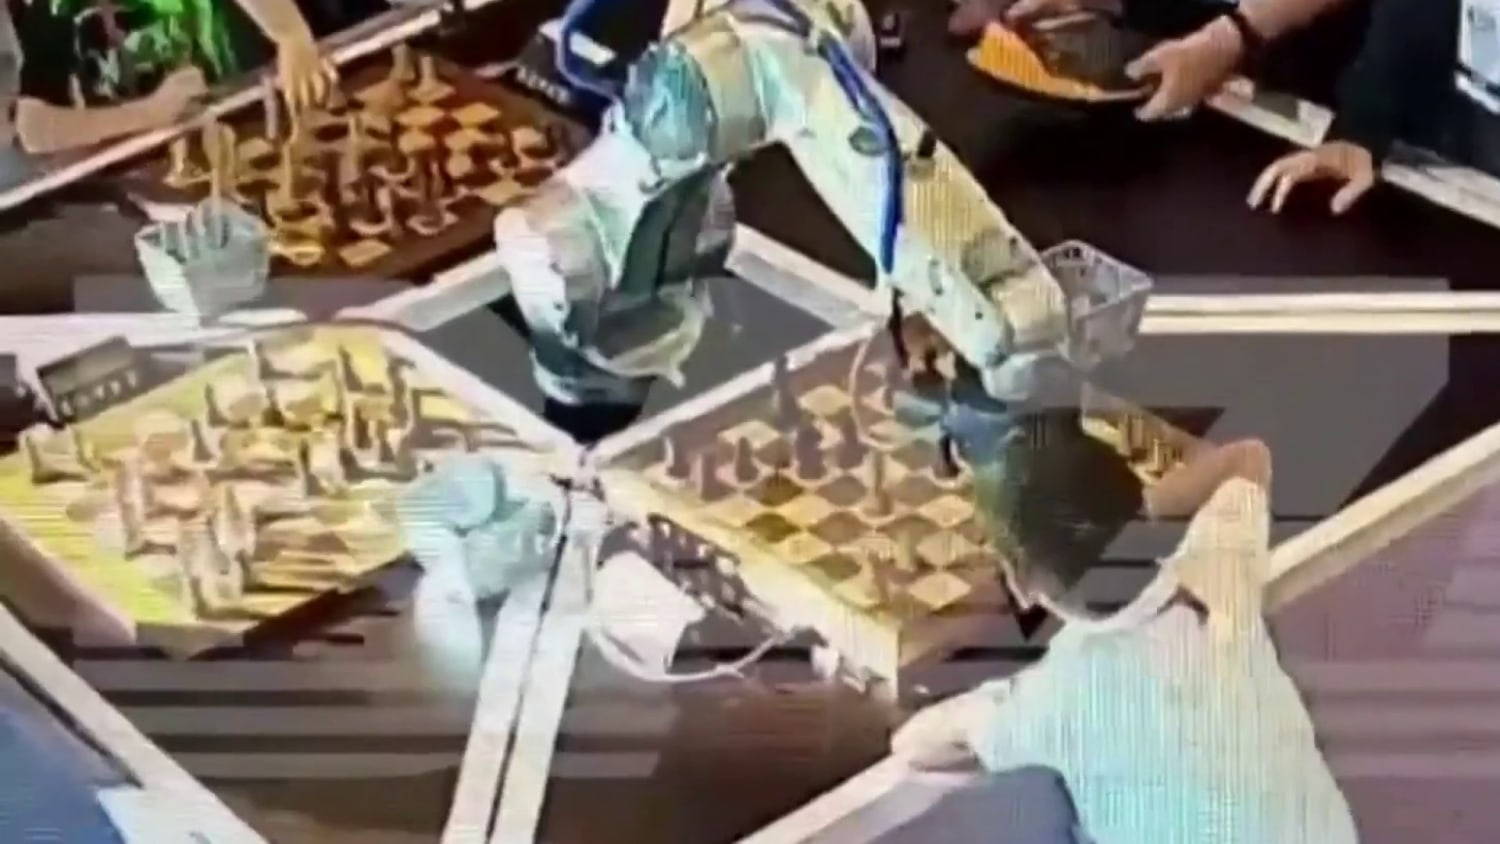 Chess robot grabs and breaks finger of seven-year-old opponent, Chess